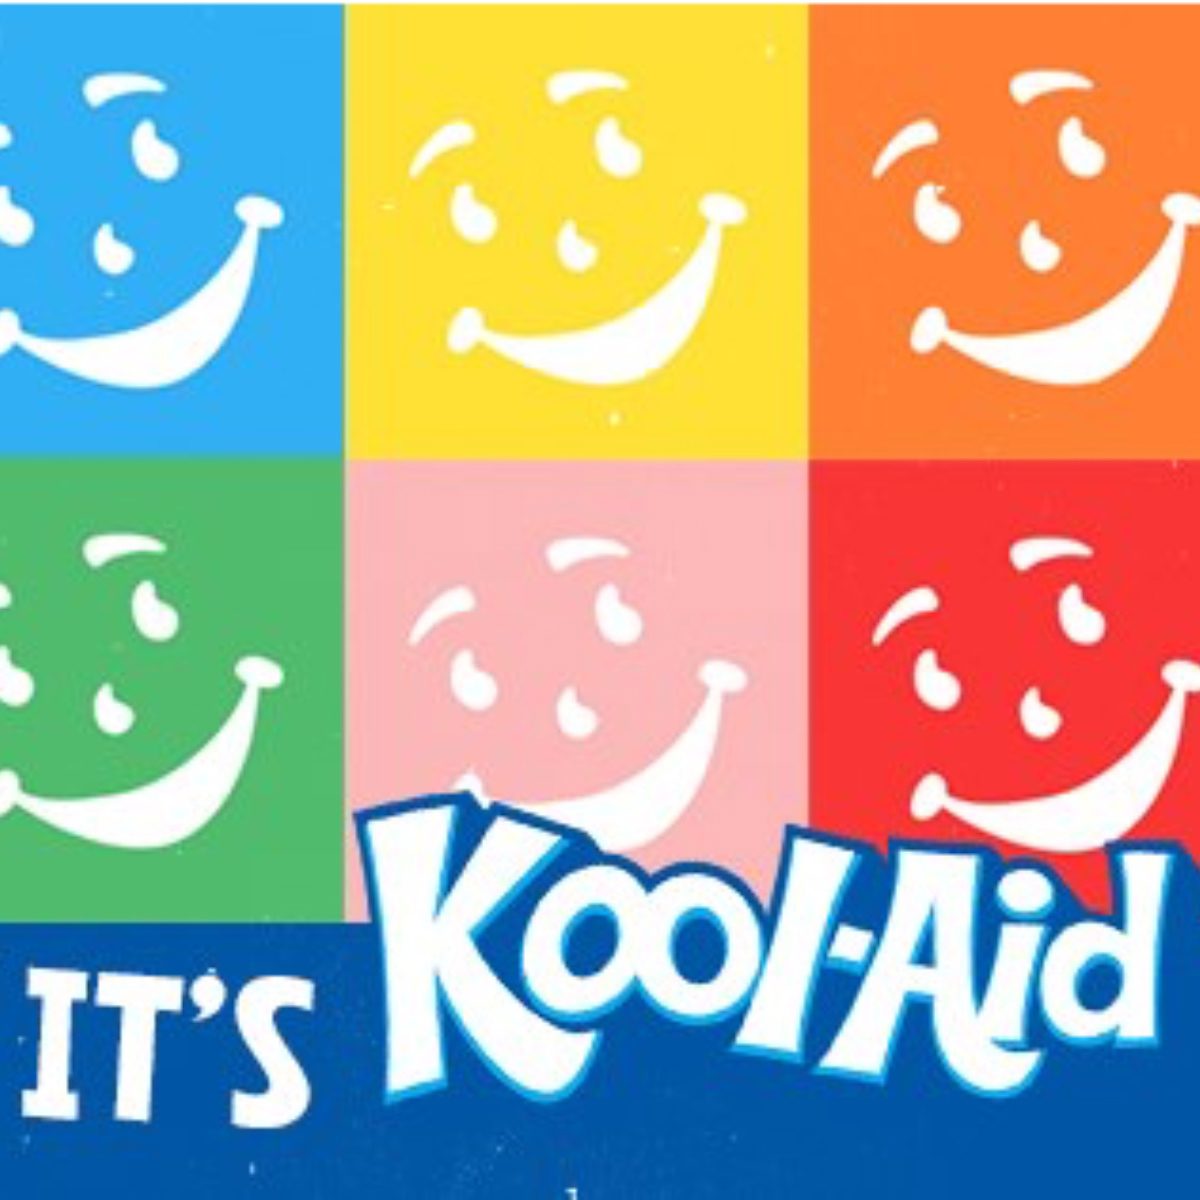 <p><strong><a class="SWhtmlLink" href="http://www.koolaid.com" rel="noopener">Kool-Aid</a>, Hastings</strong></p> <p>Did you know that Kool-Aid brought a family from rags-to-riches, a true example of the American Dream? Inventor Edwin E. Perkins was inspired by Jell-O's transformation from powder to gel and was convinced he could turn his invention, a drink called Fruit-Smack, into a powder. He did, and became a millionaire!</p> <p><a class="SWhtmlLink" href="https://www.tasteofhome.com/recipes/kool-aid-pickles/" rel="noopener">Did you know that you can make colorful Kool-Aid pickles?</a></p>